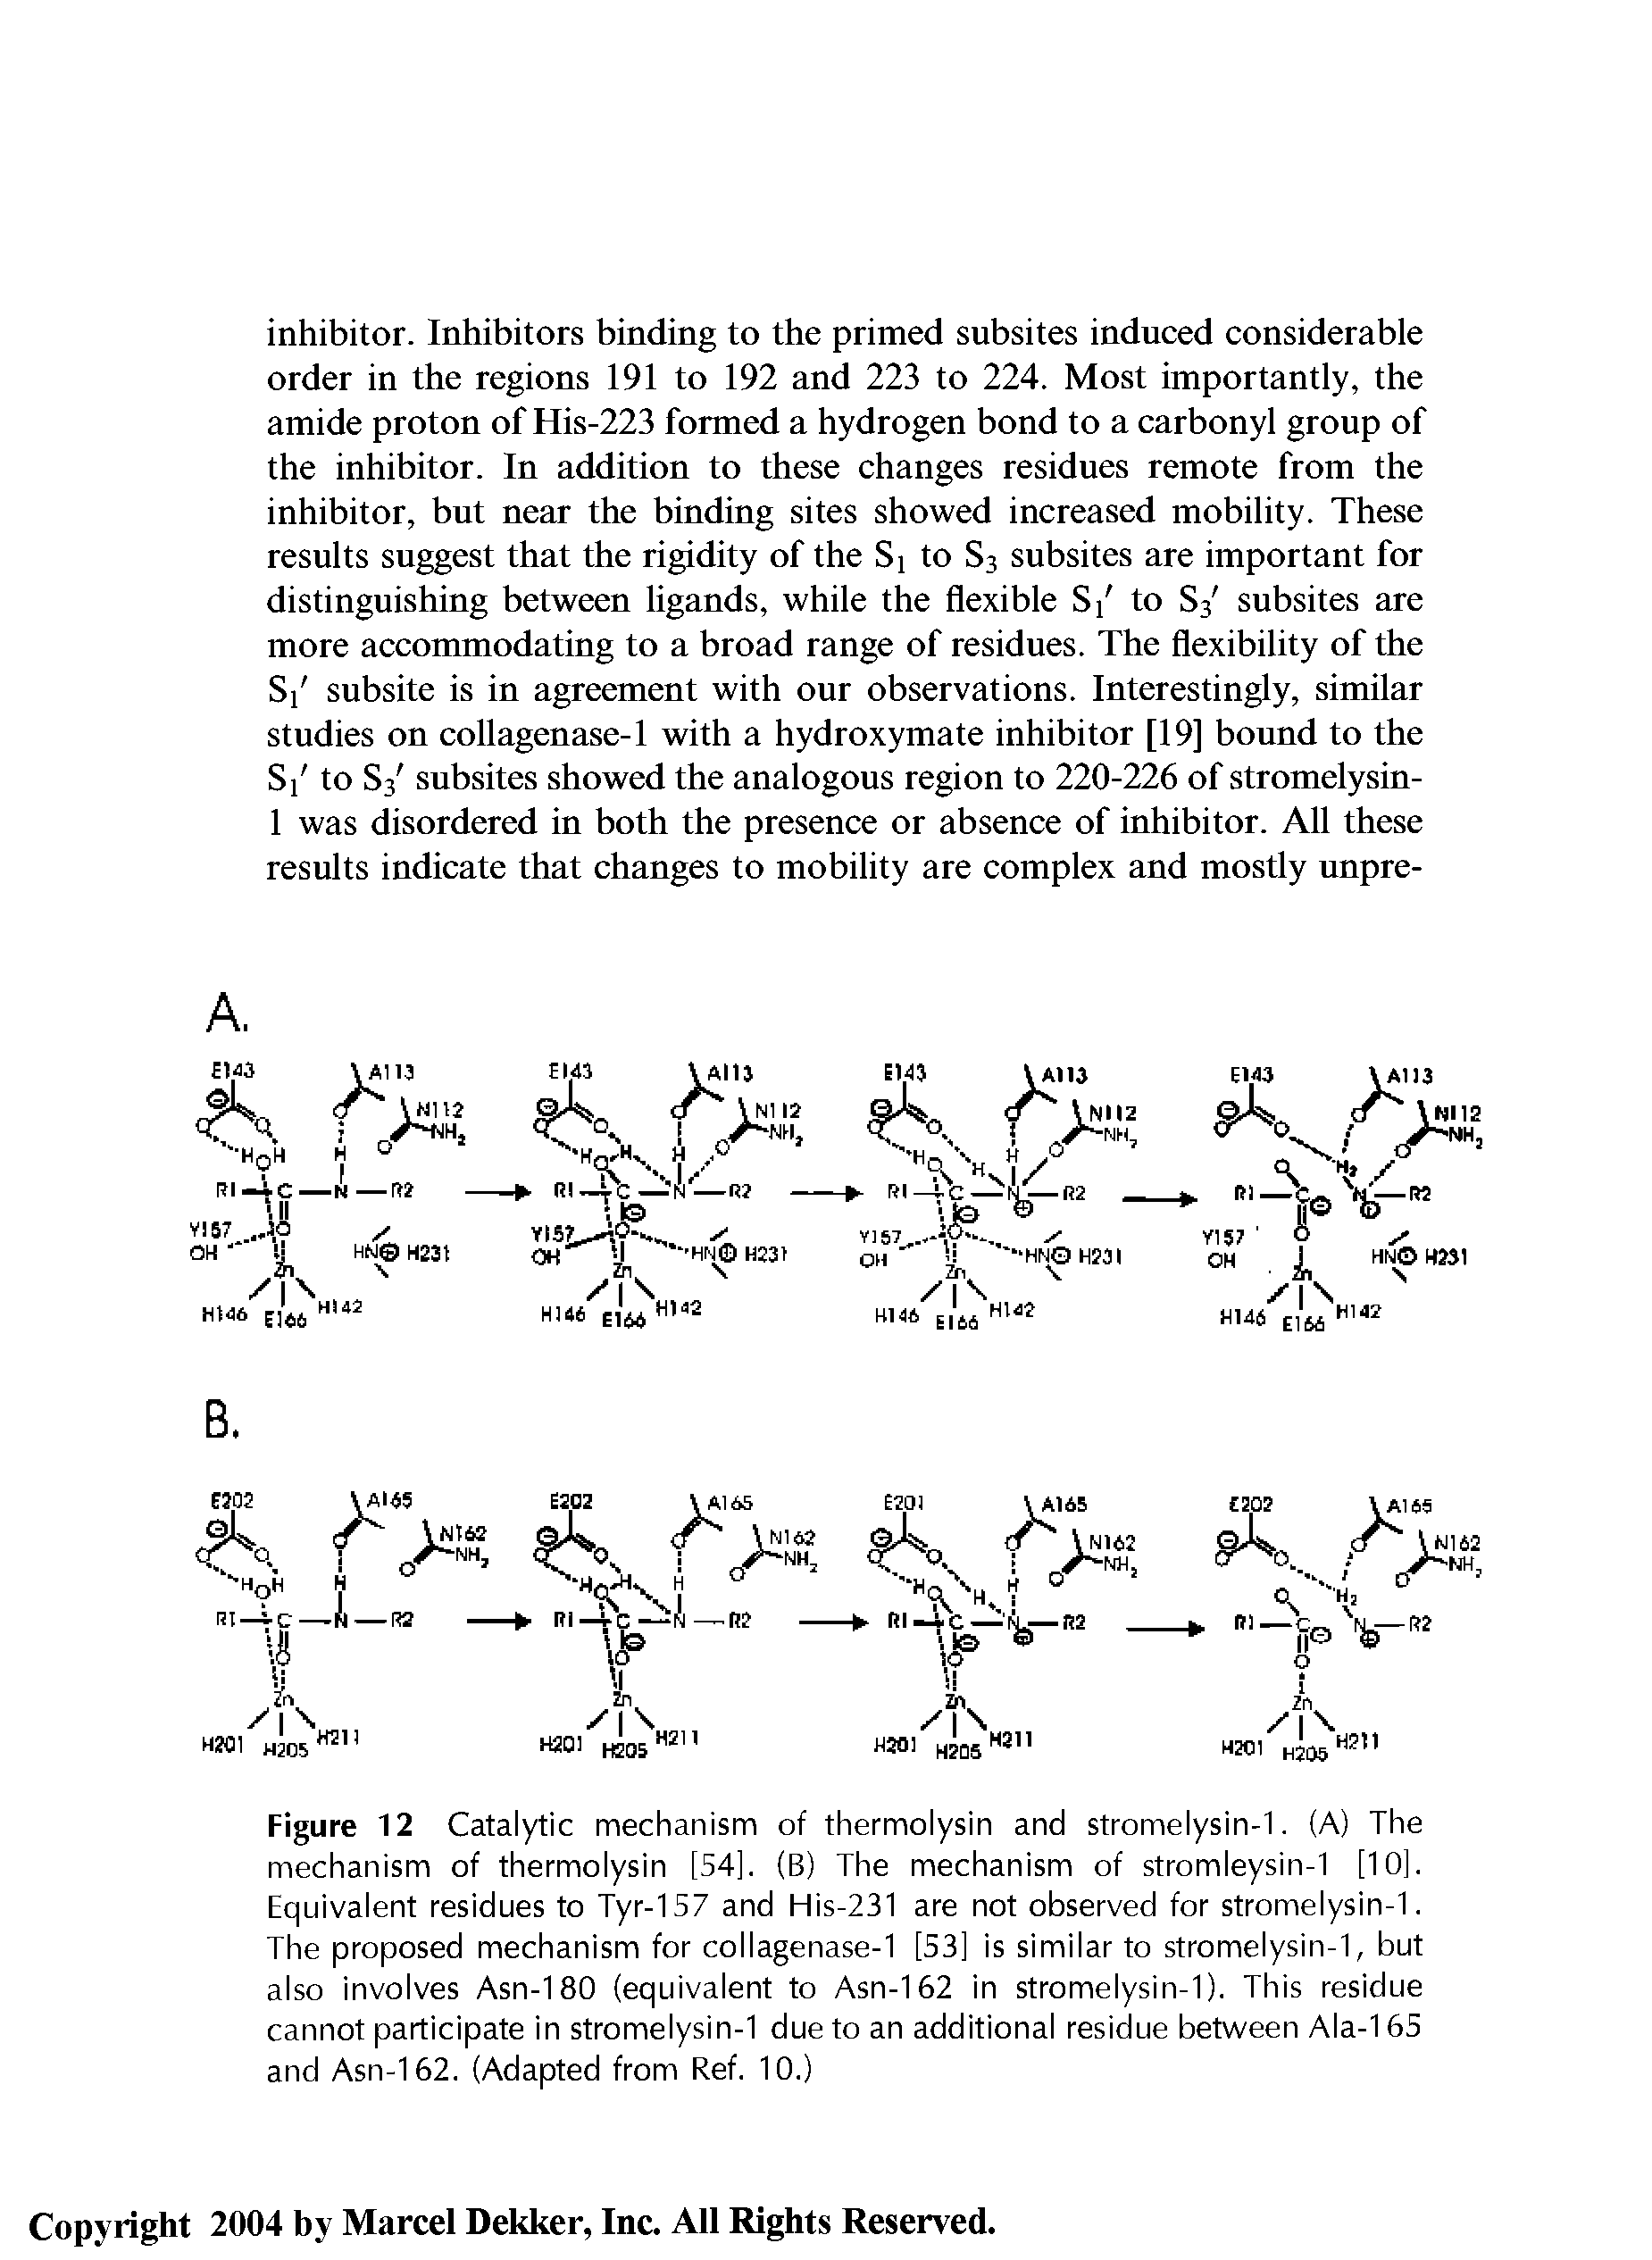 Figure 12 Catalytic mechanism of thermolysin and stromelysin-1. (A) The mechanism of thermolysin [54], (B) The mechanism of stromleysin-1 [10]. Equivalent residues to Tyr-157 and His-231 are not observed for stromelysin-1. The proposed mechanism for collagenase-1 [S3] is similar to stromelysin-1, but also involves Asn-180 (equivalent to Asn-162 in stromelysin-1). This residue cannot participate in stromelysin-1 due to an additional residue between Ala-165 and Asn-162. (Adapted from Ref. 10.)...